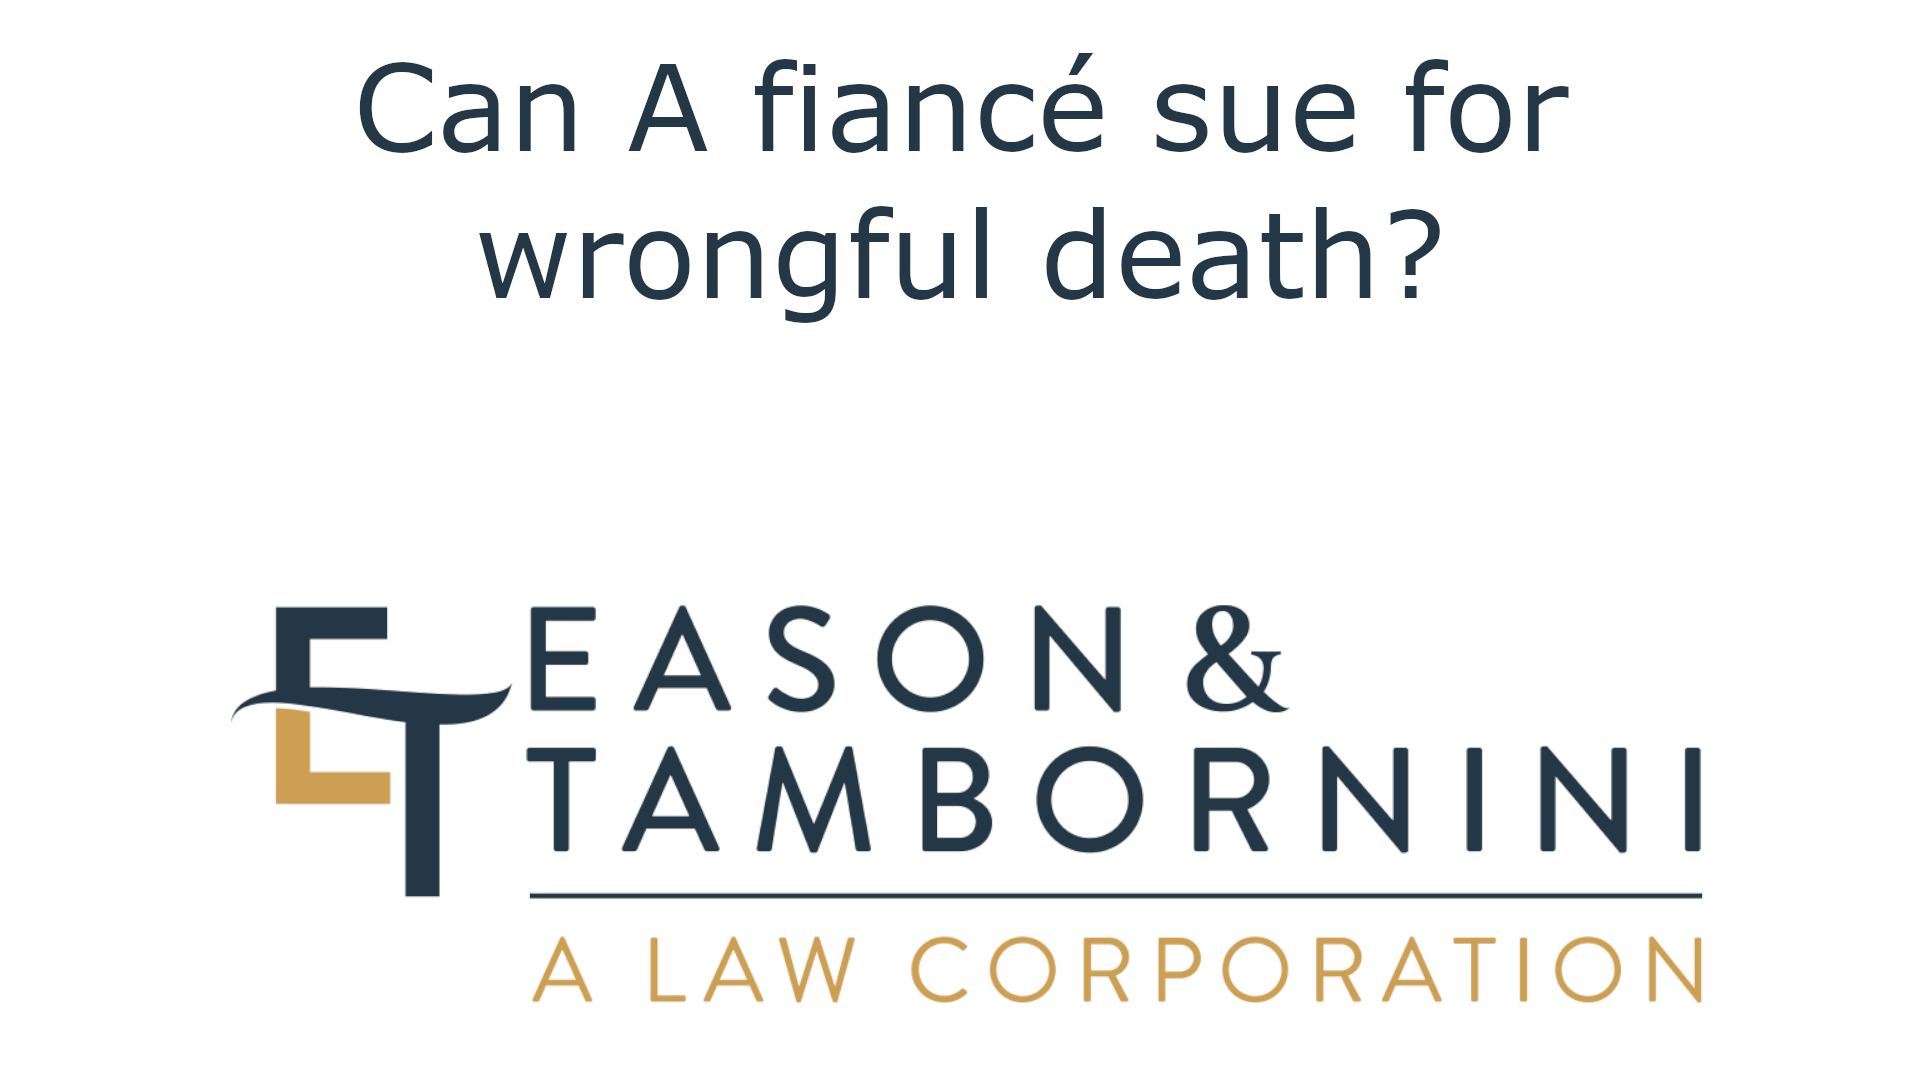 Can a fiance sue for wrongful death?